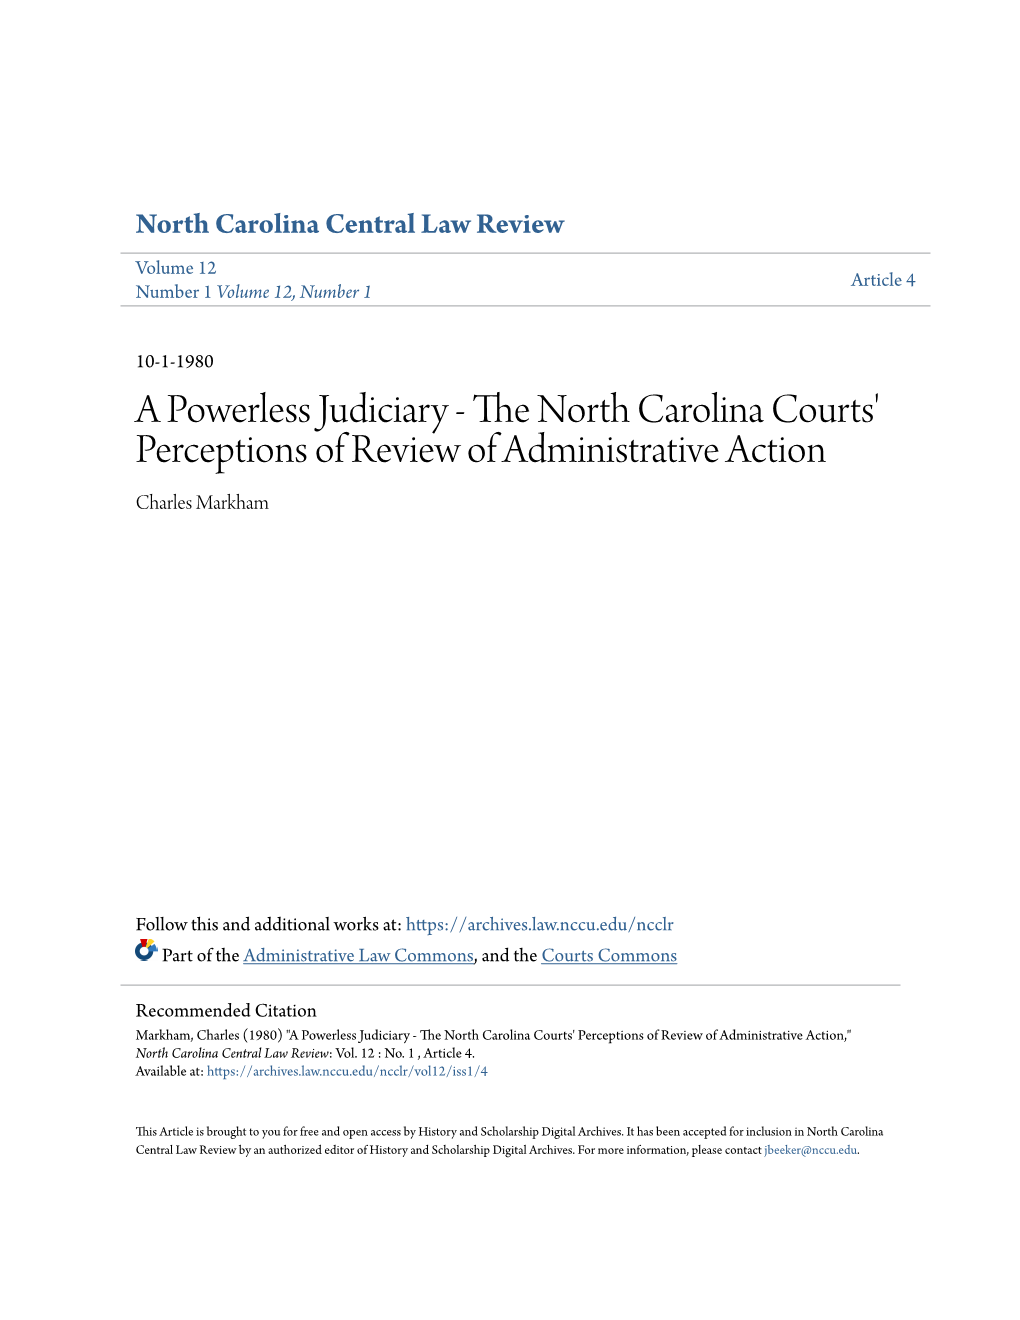 A Powerless Judiciary - the Orn Th Carolina Courts' Perceptions of Review of Administrative Action Charles Markham